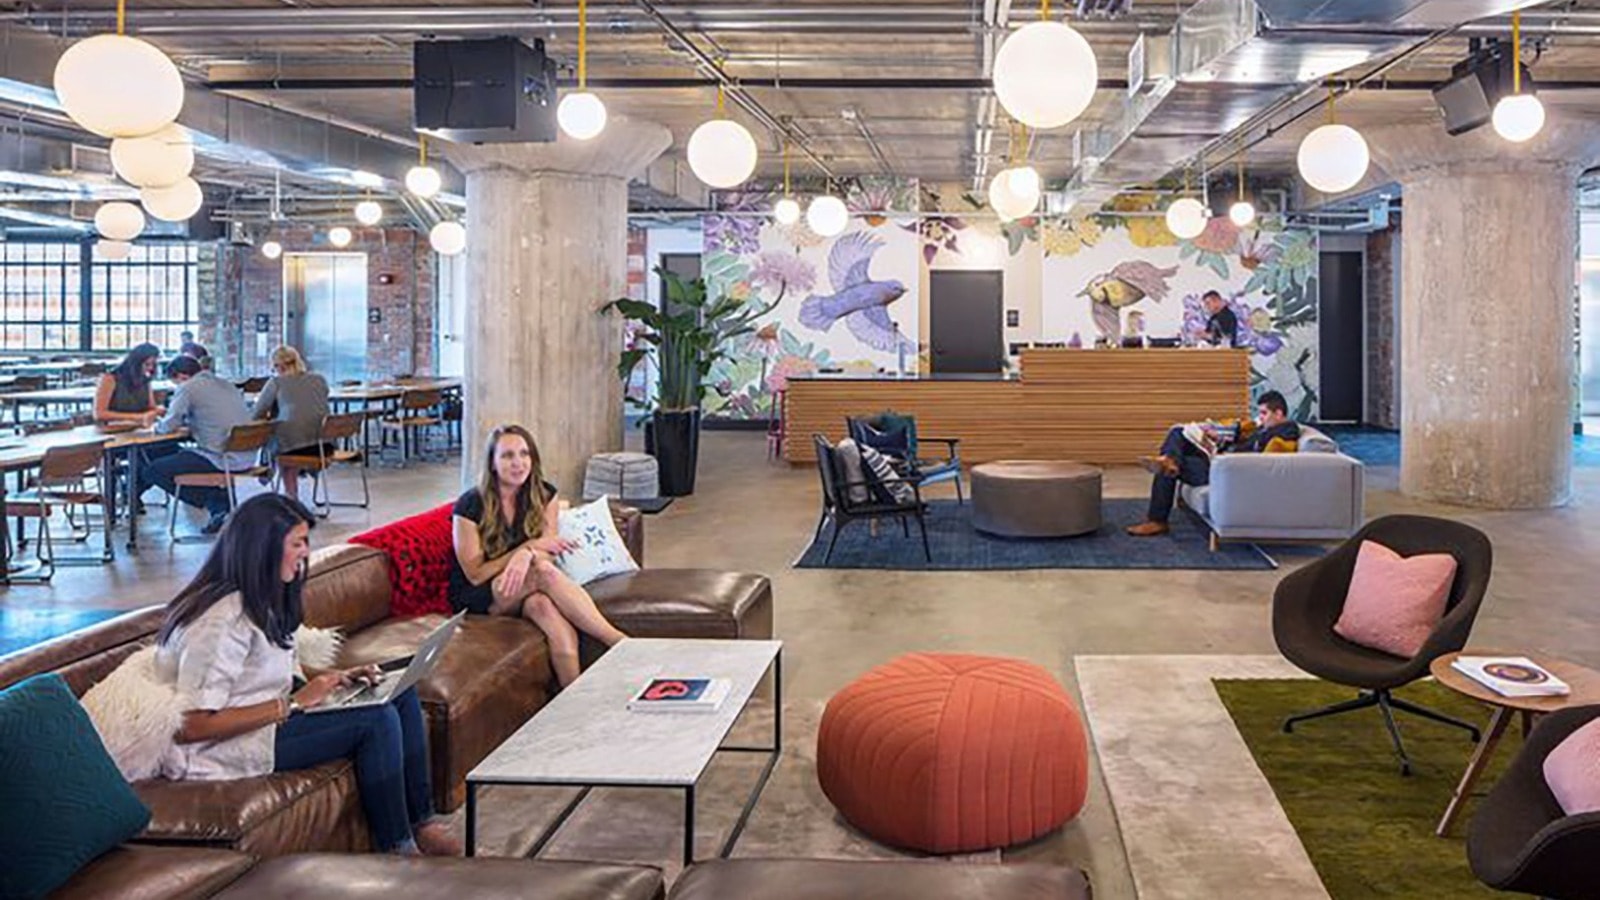 Shared working space at WeWork in Corrigan Station.